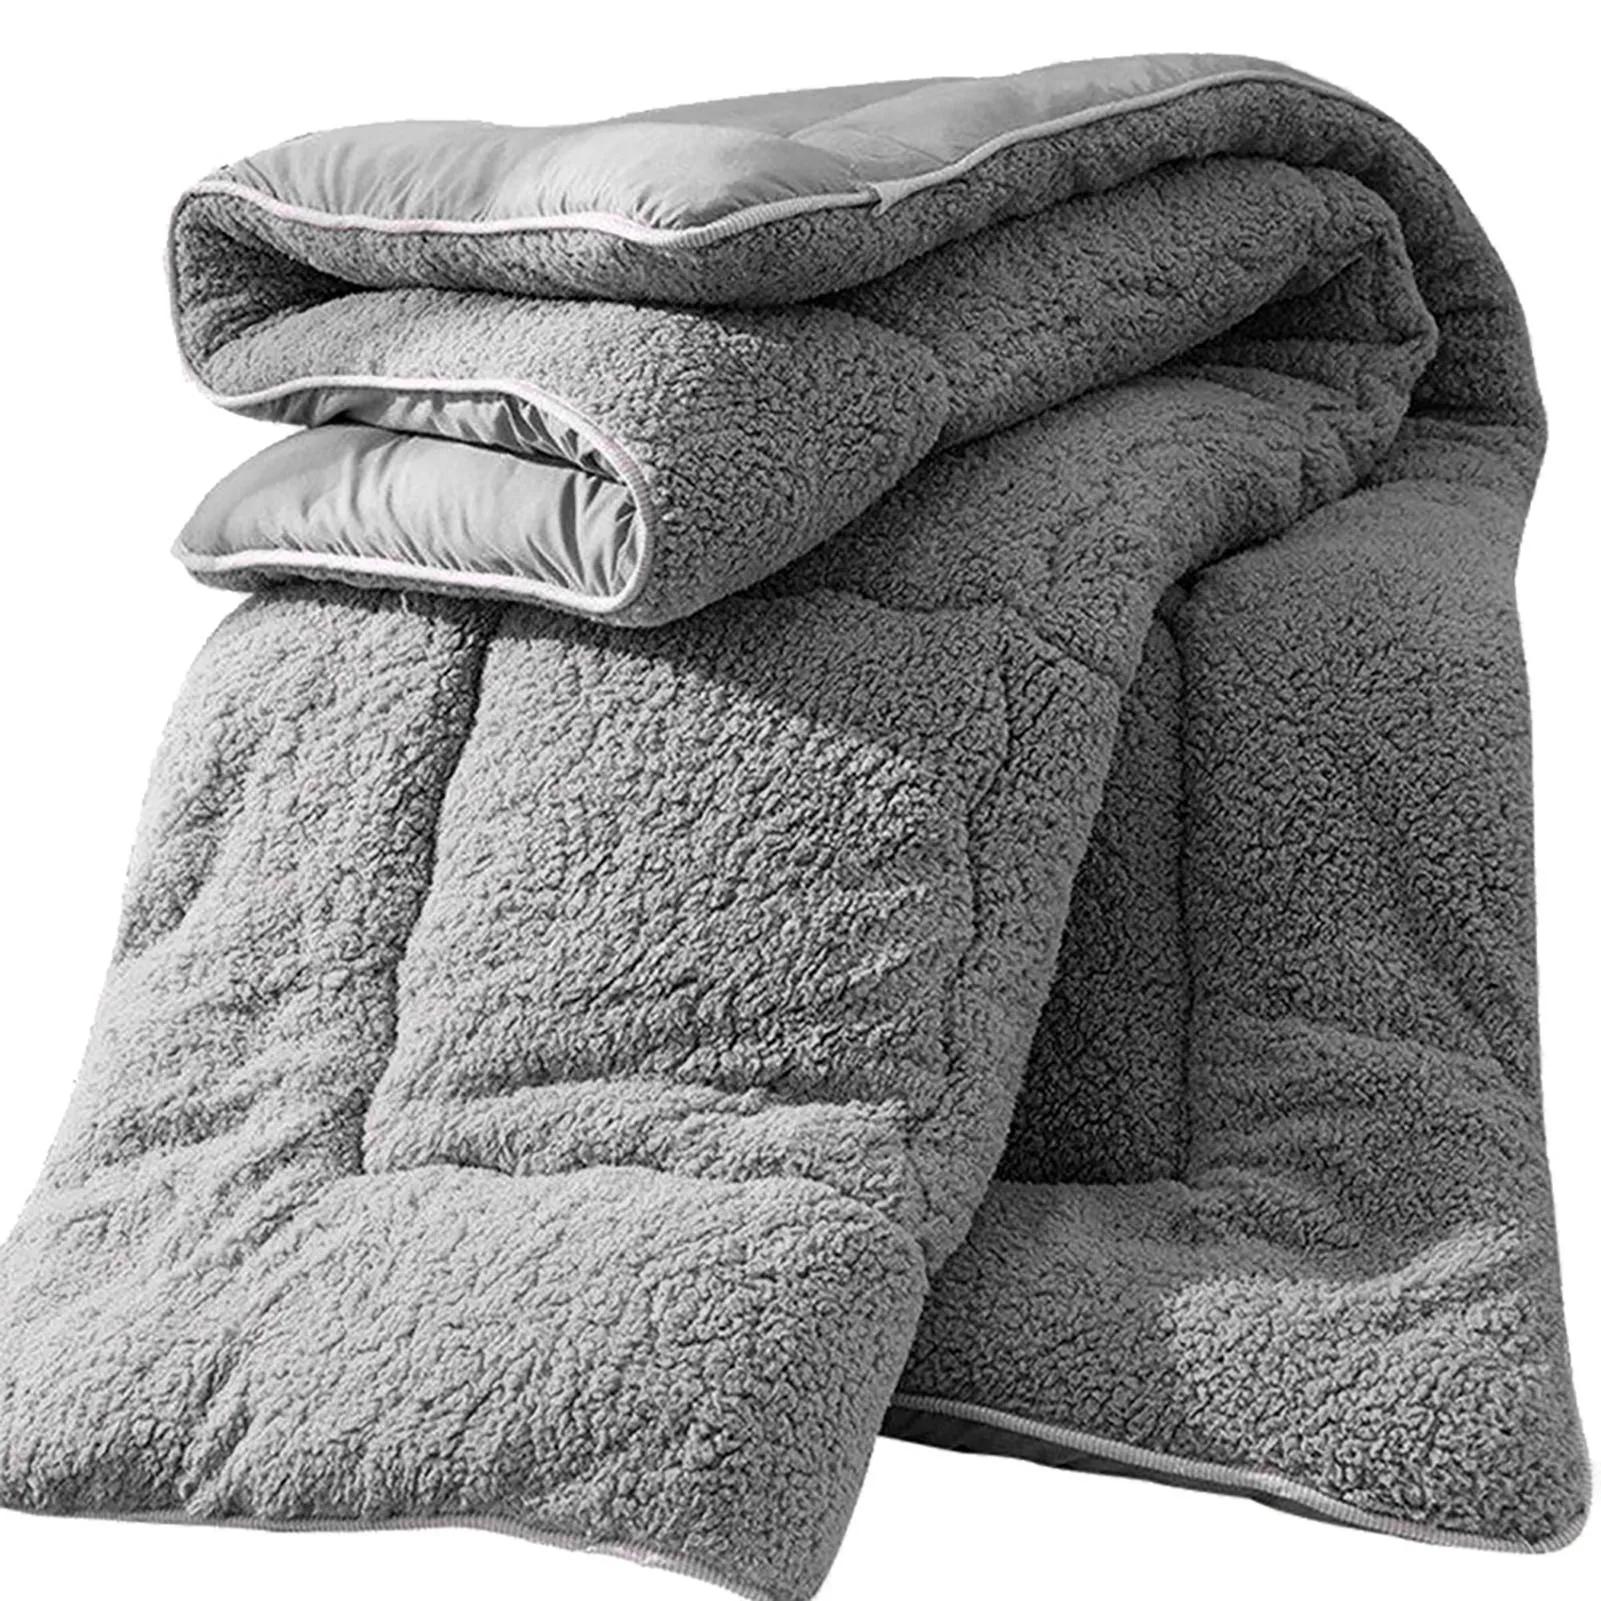 

Thickened Lambswool Blanket Winter Soft Warm Bed Quilt Bedding for Snuggling Up on the Couch or Bed